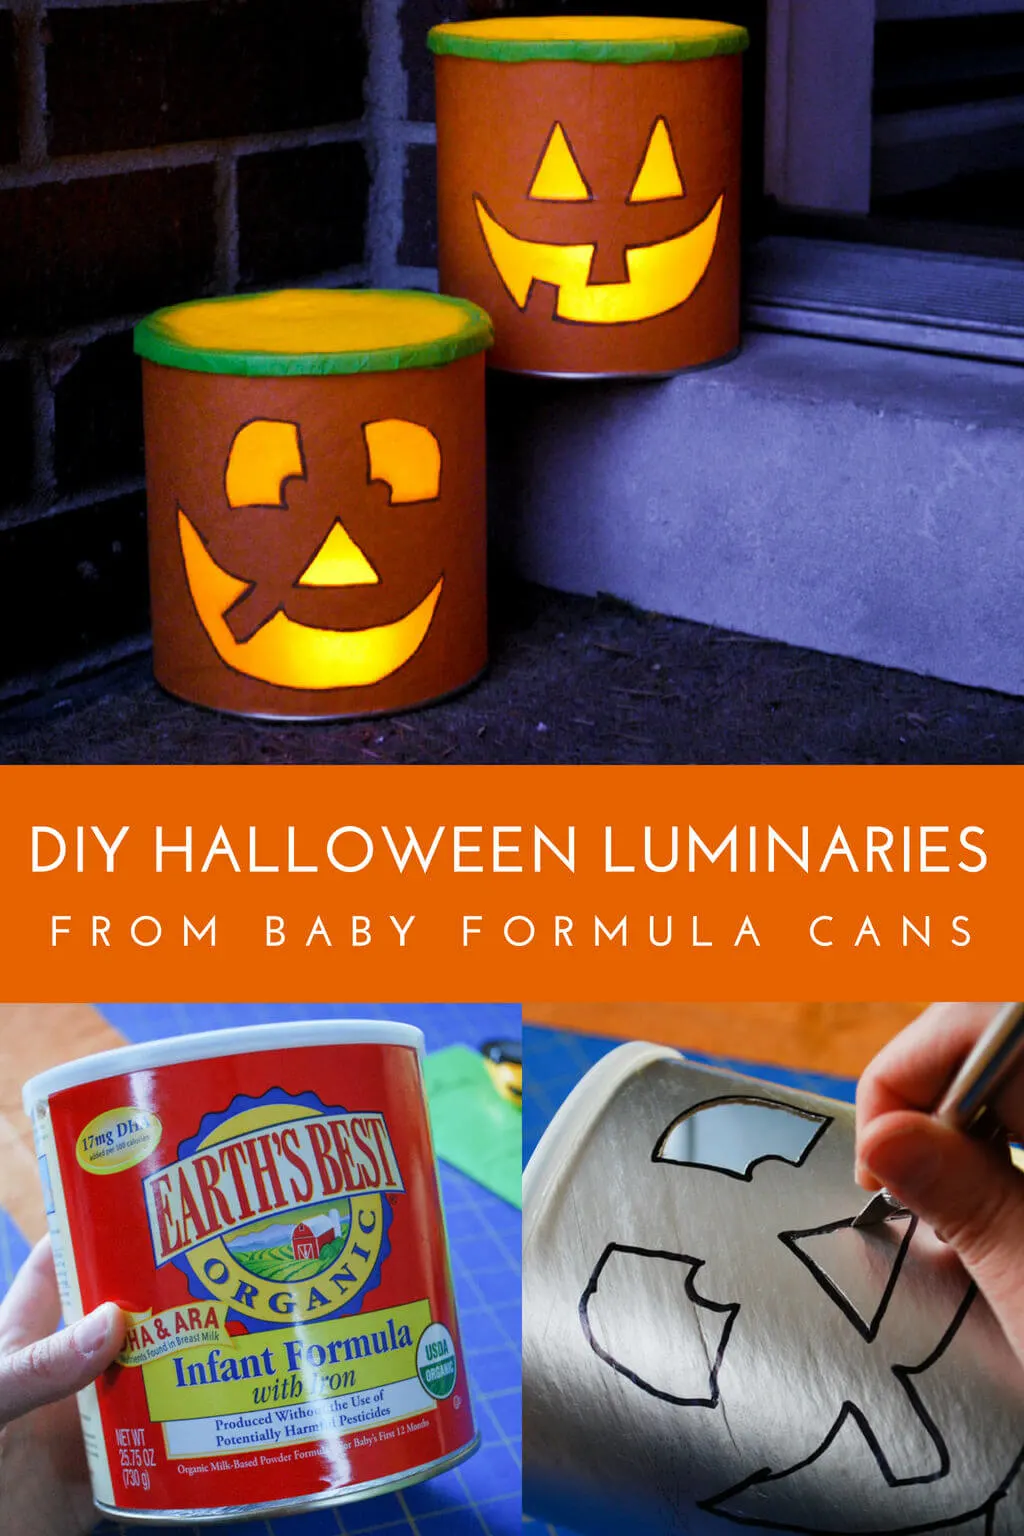 DIY Halloween luminaries from recycled baby formula cans